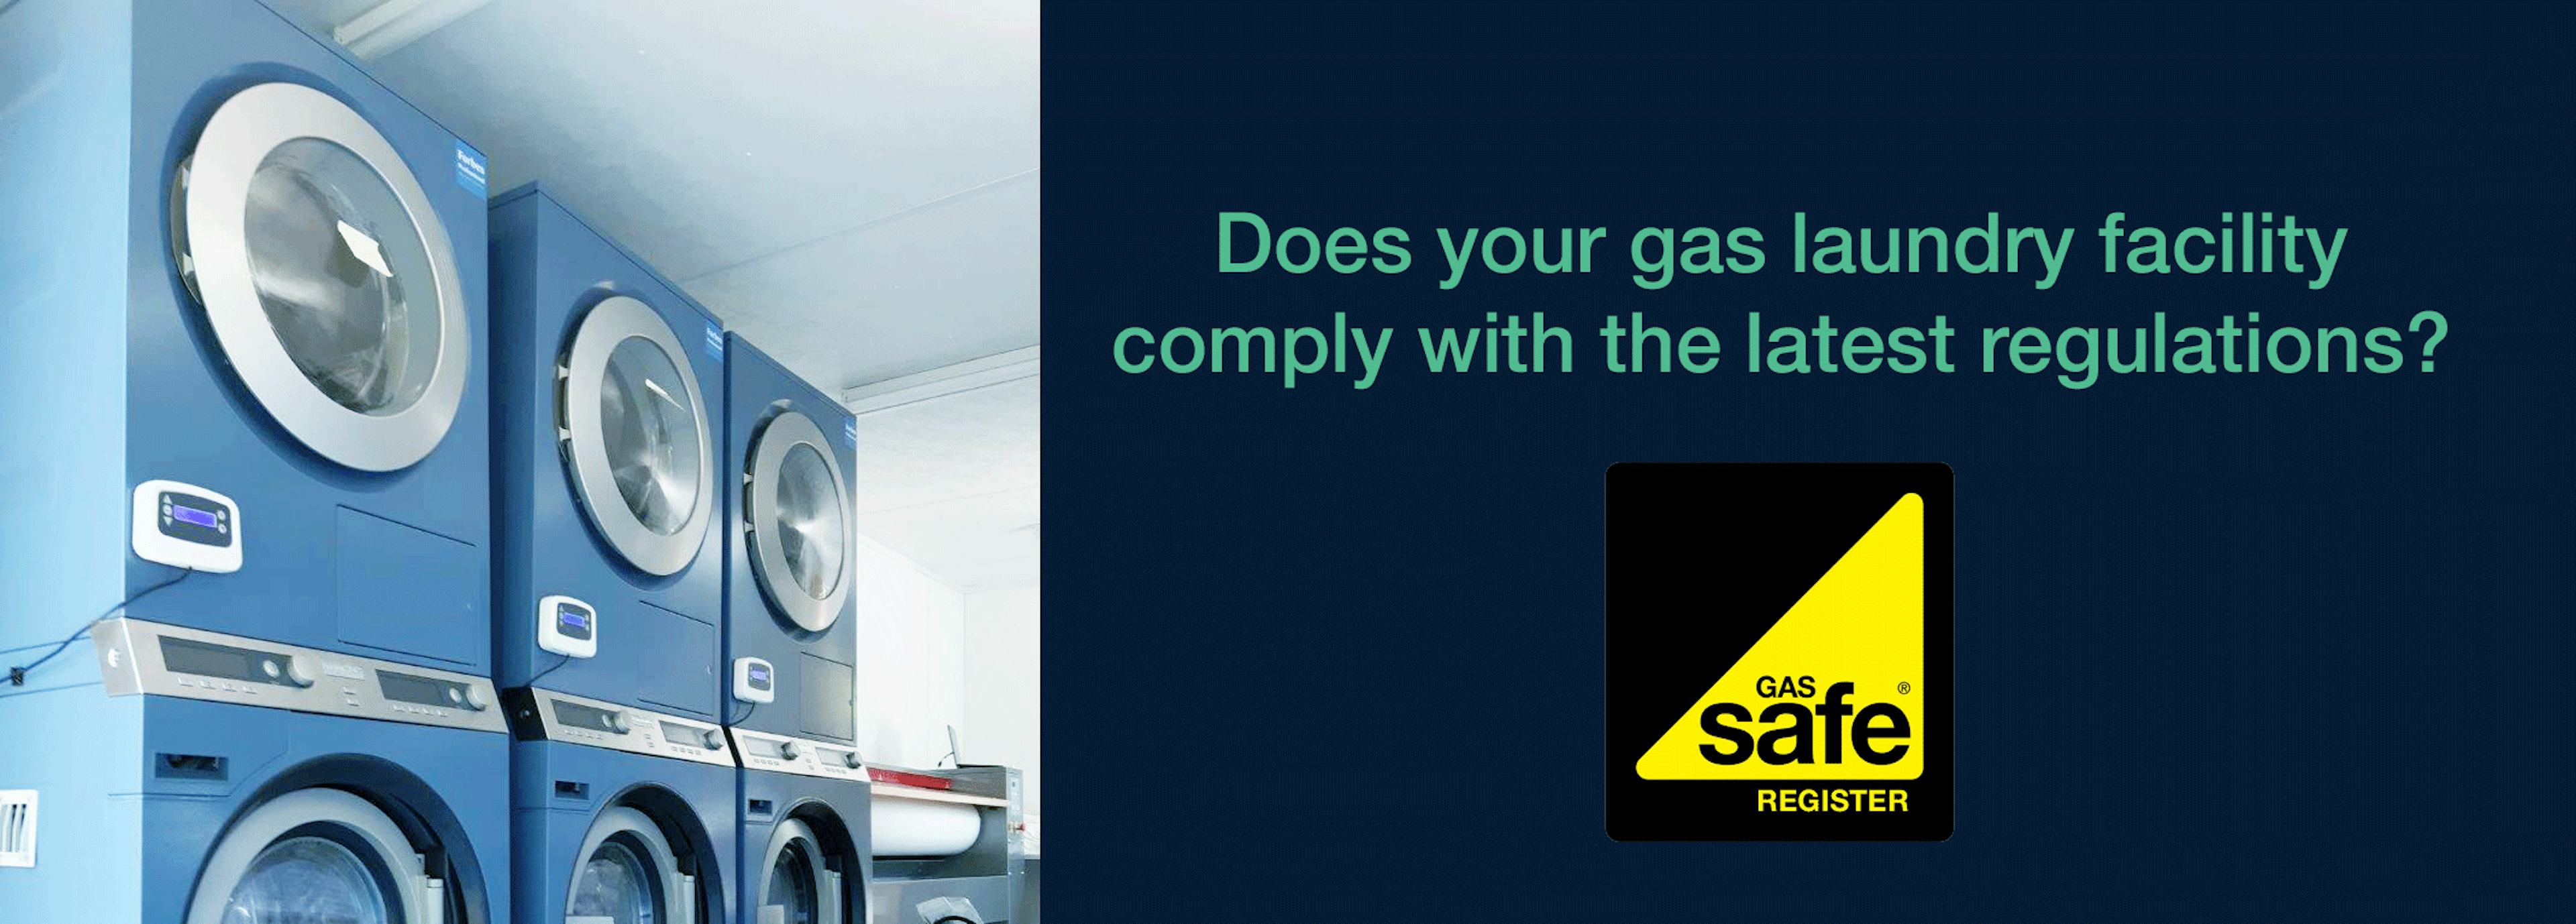 Does your gas laundry facility comply with the latest regulations?